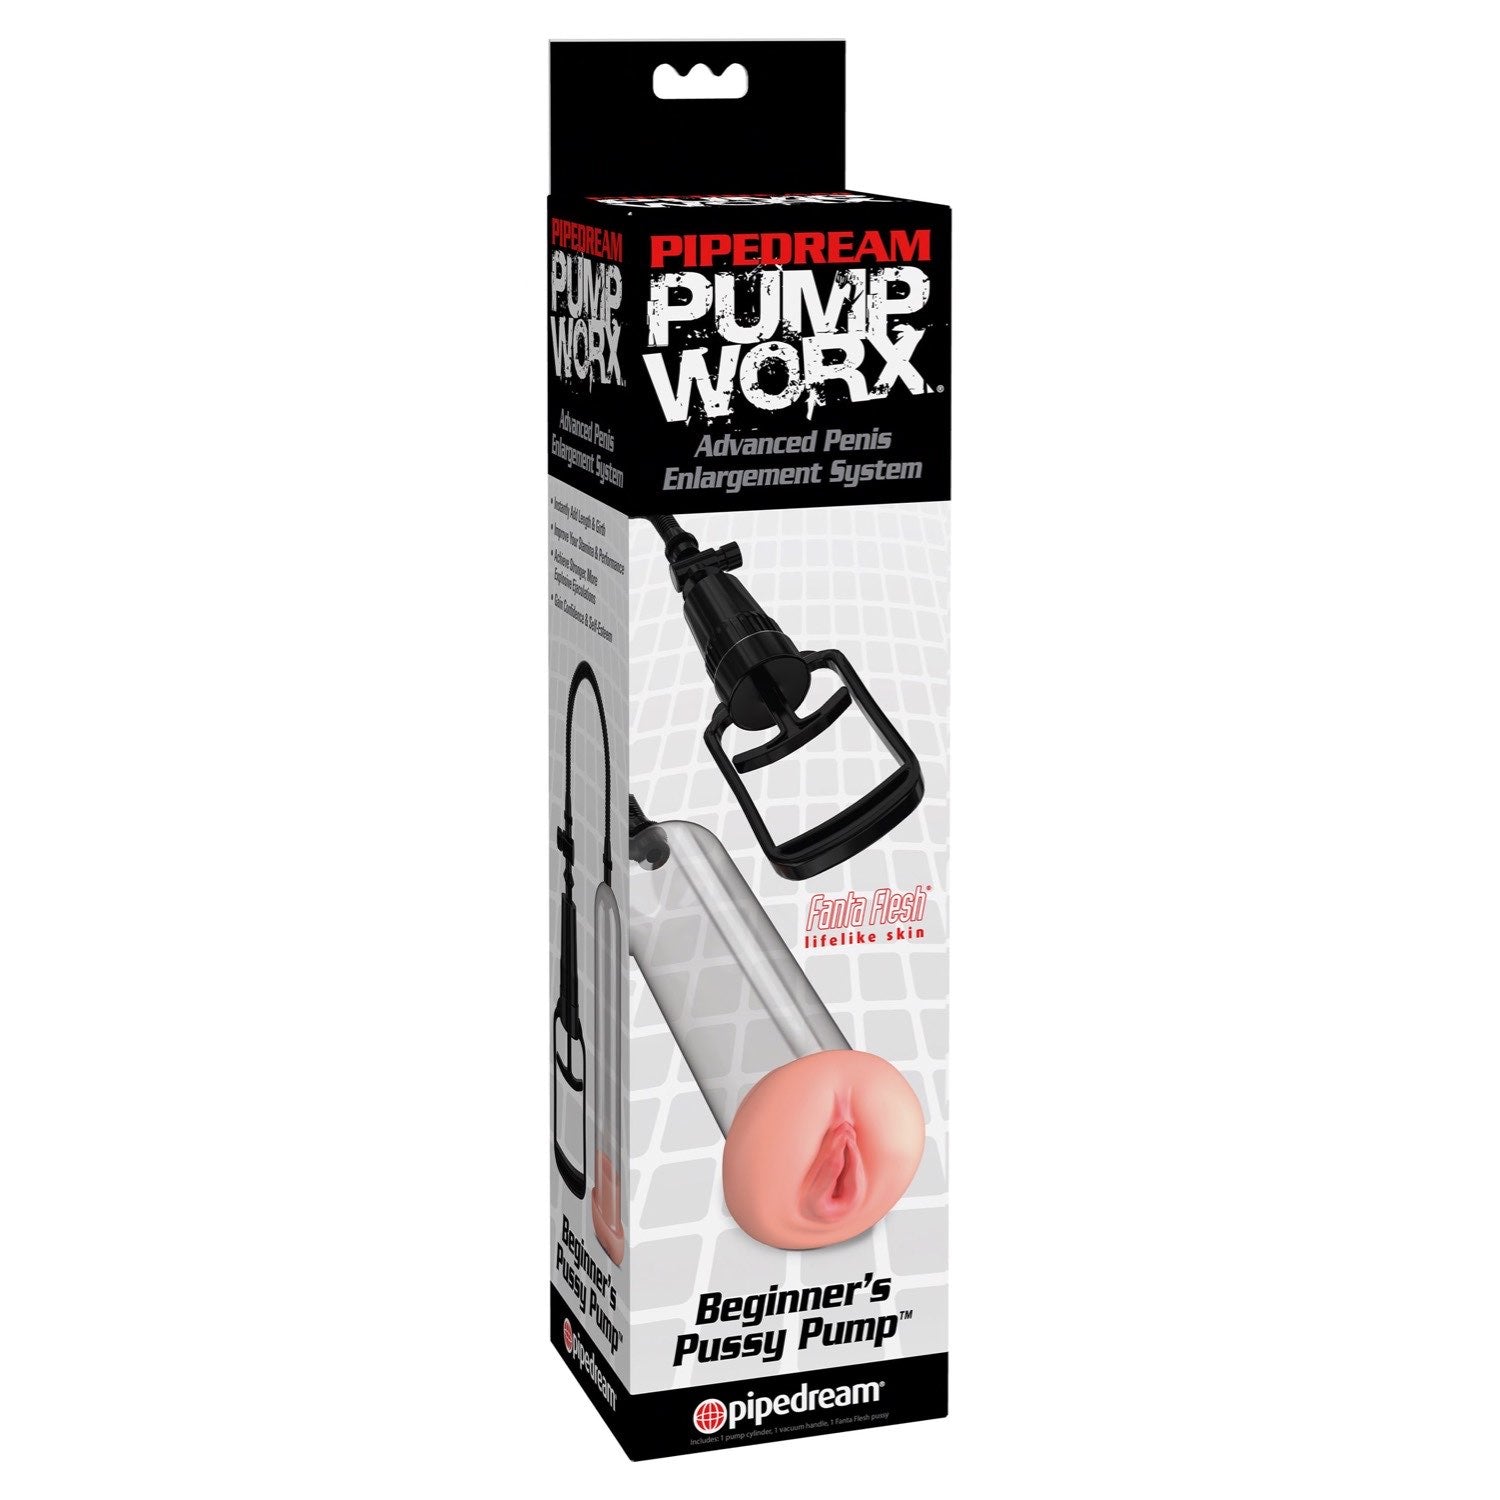 Pump Worx Beginner&#39;s Pussy Pump - Penis Pump with Vagina Sleeve by Pipedream